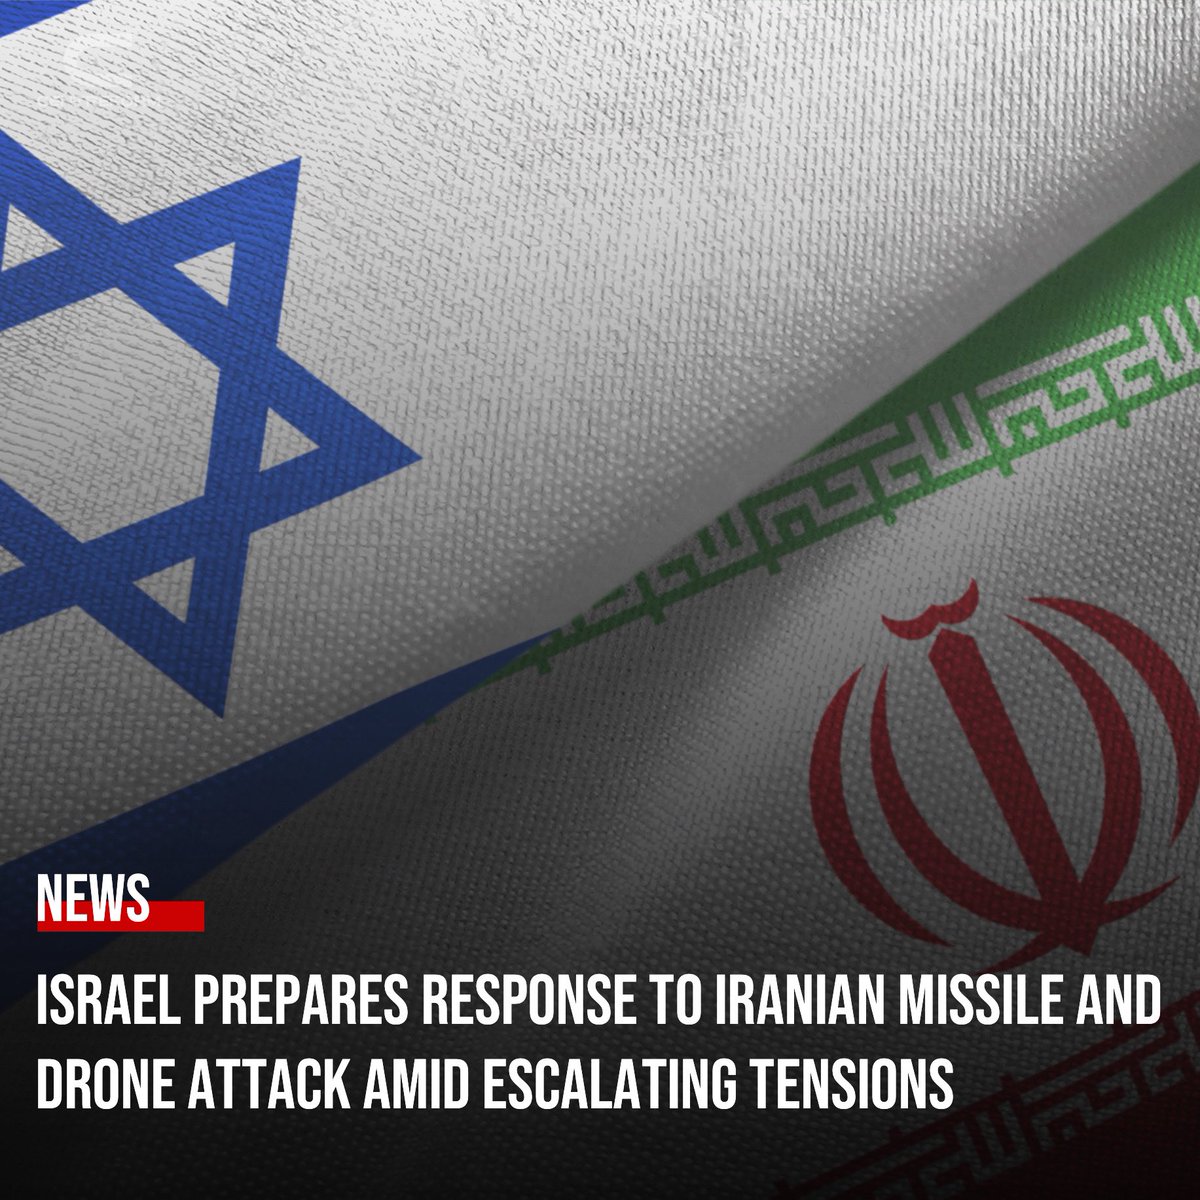 Israeli Minister of Defense Yoav Gallant has indicated to Defense Secretary Lloyd Austin that Israel will respond to the recent missile and drone attack launched by Iran. The Biden administration and Western allies are urging caution to prevent further escalation and regional